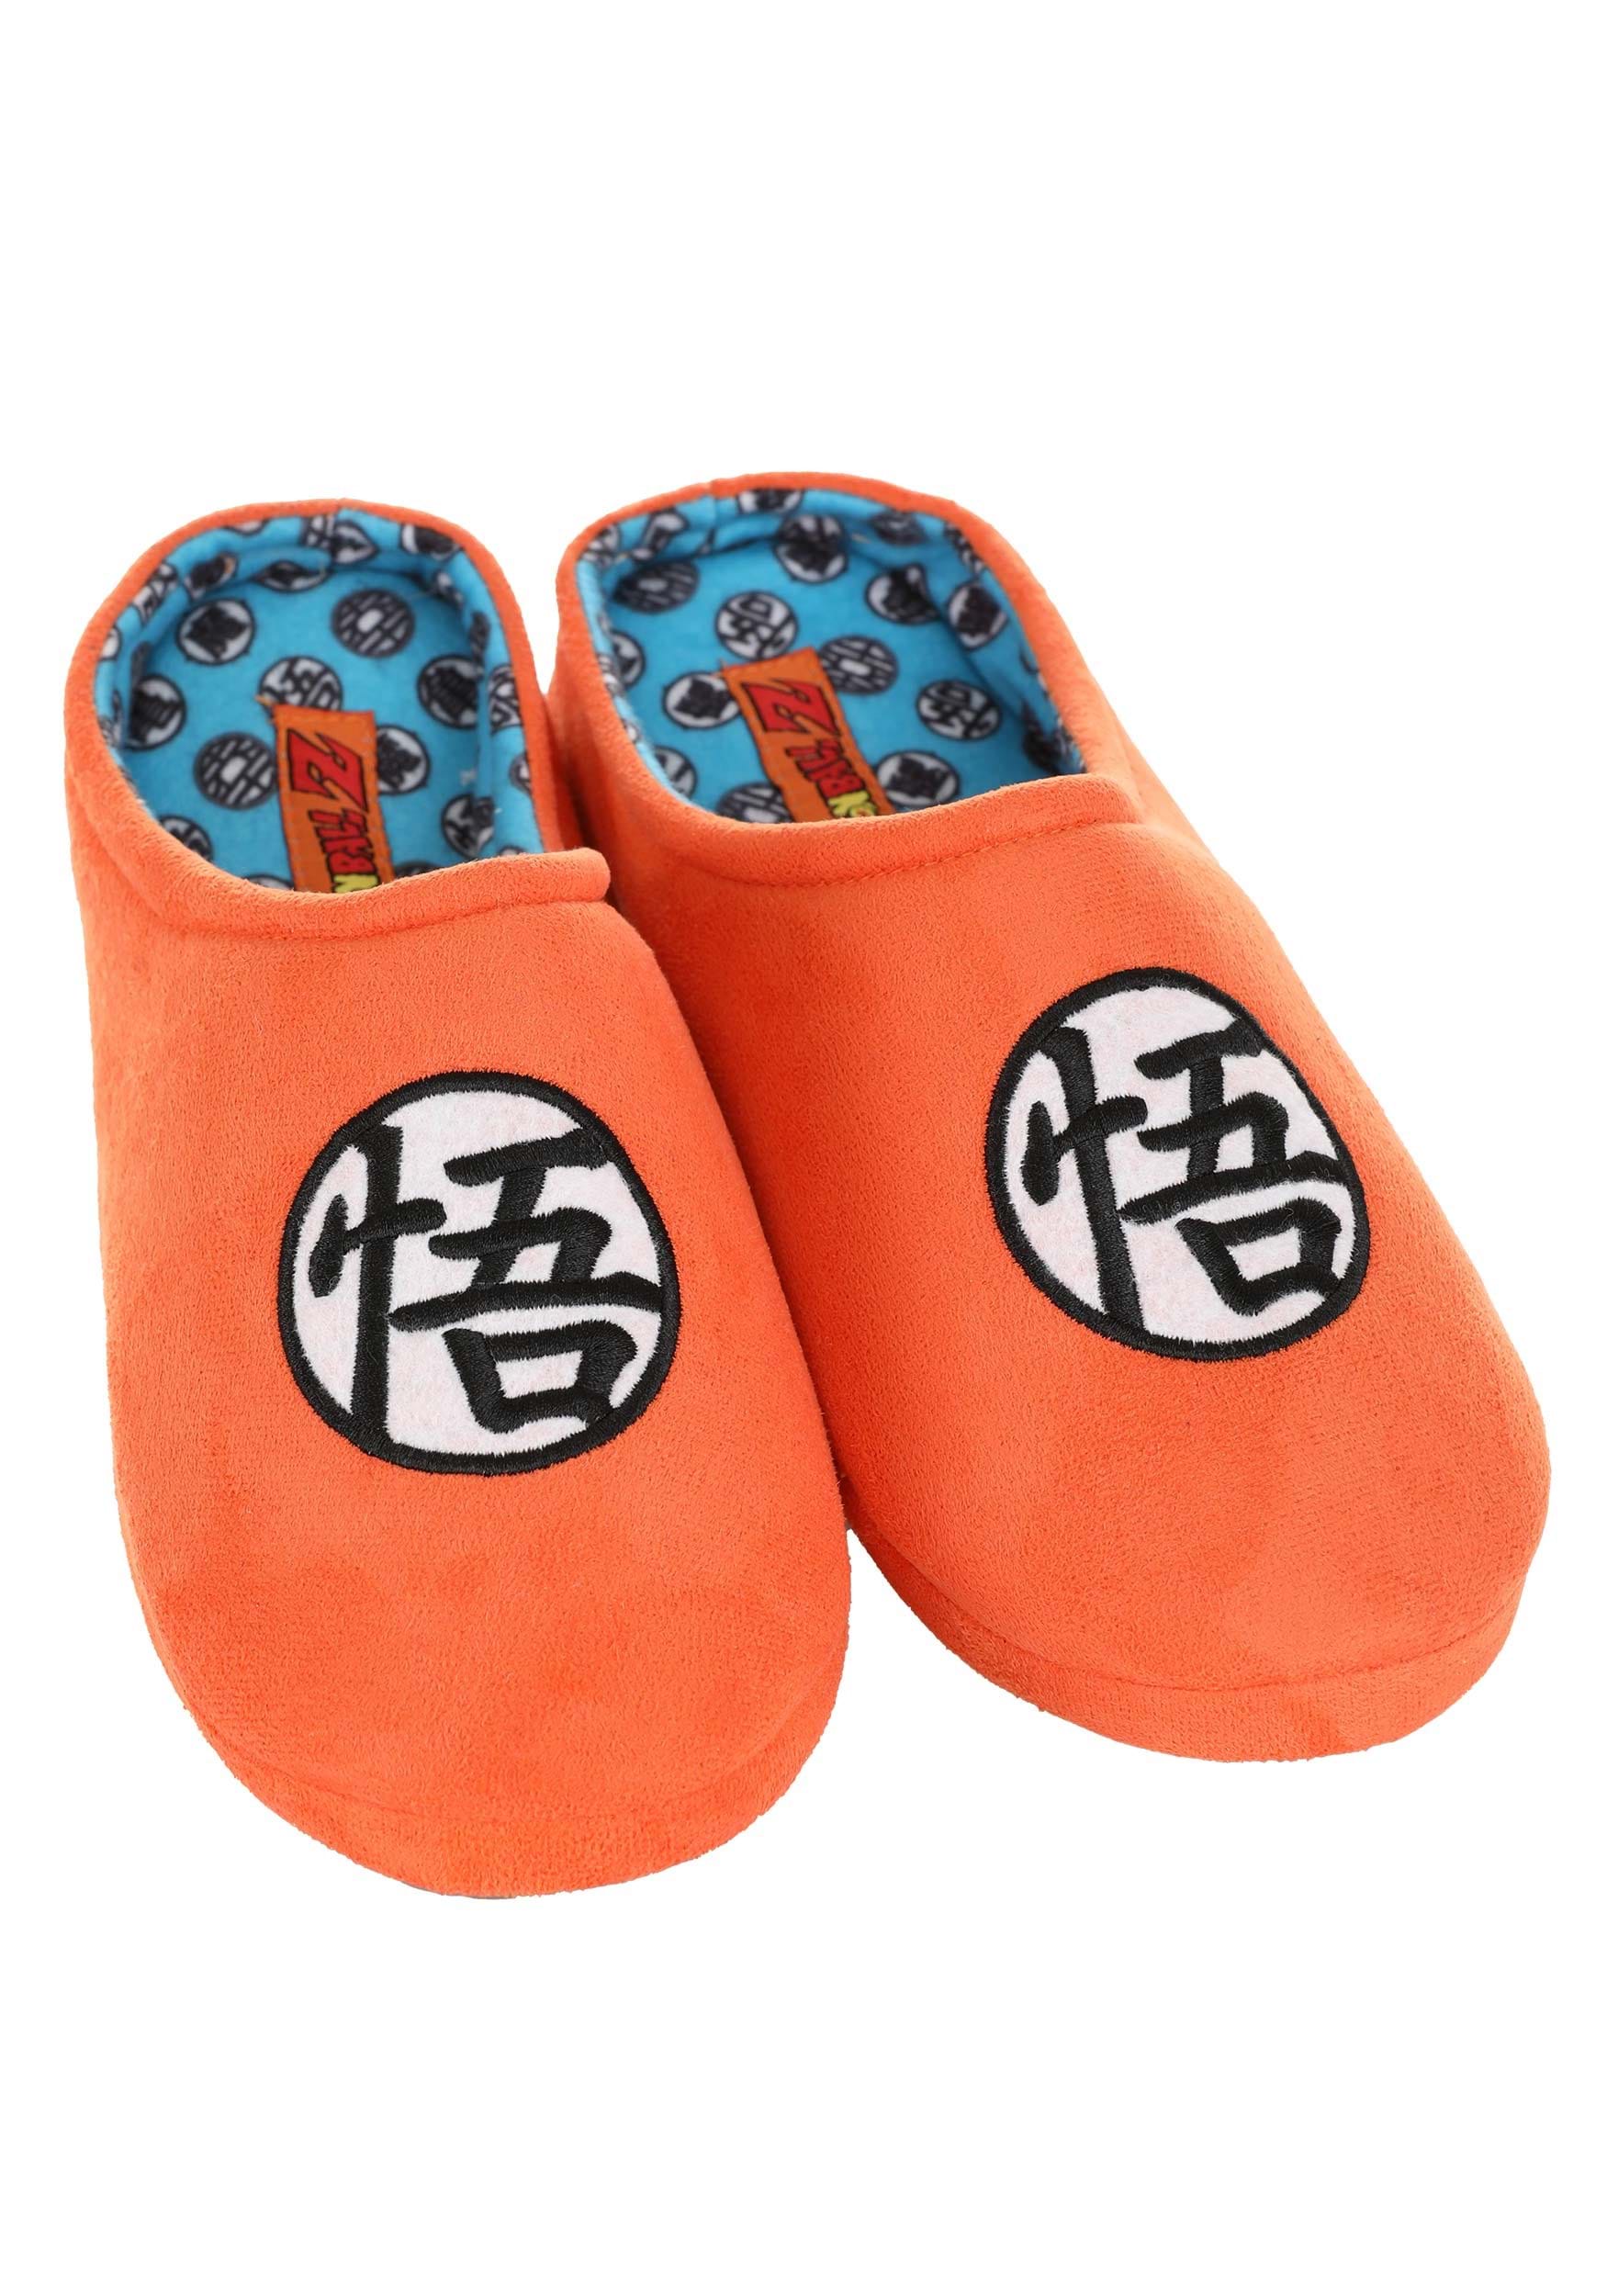 Dragon Ball Z Slippers for Adults